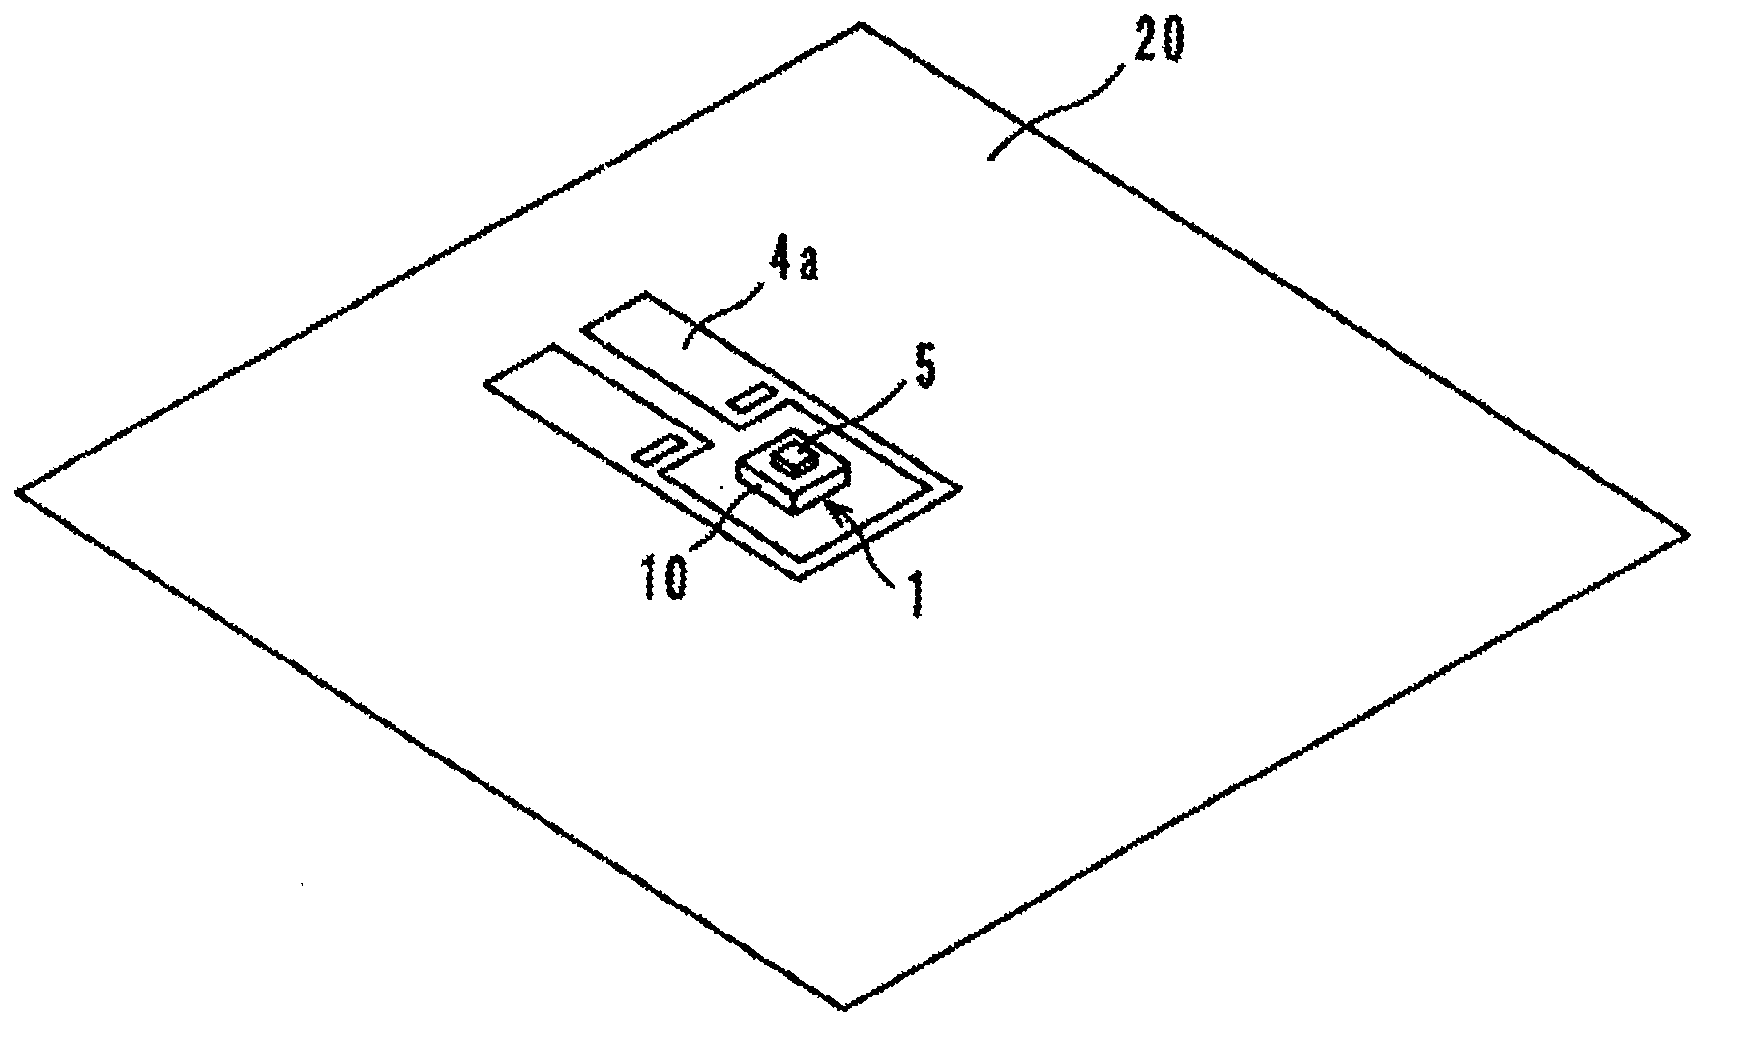 Article having electromagnetic coupling module attached thereto